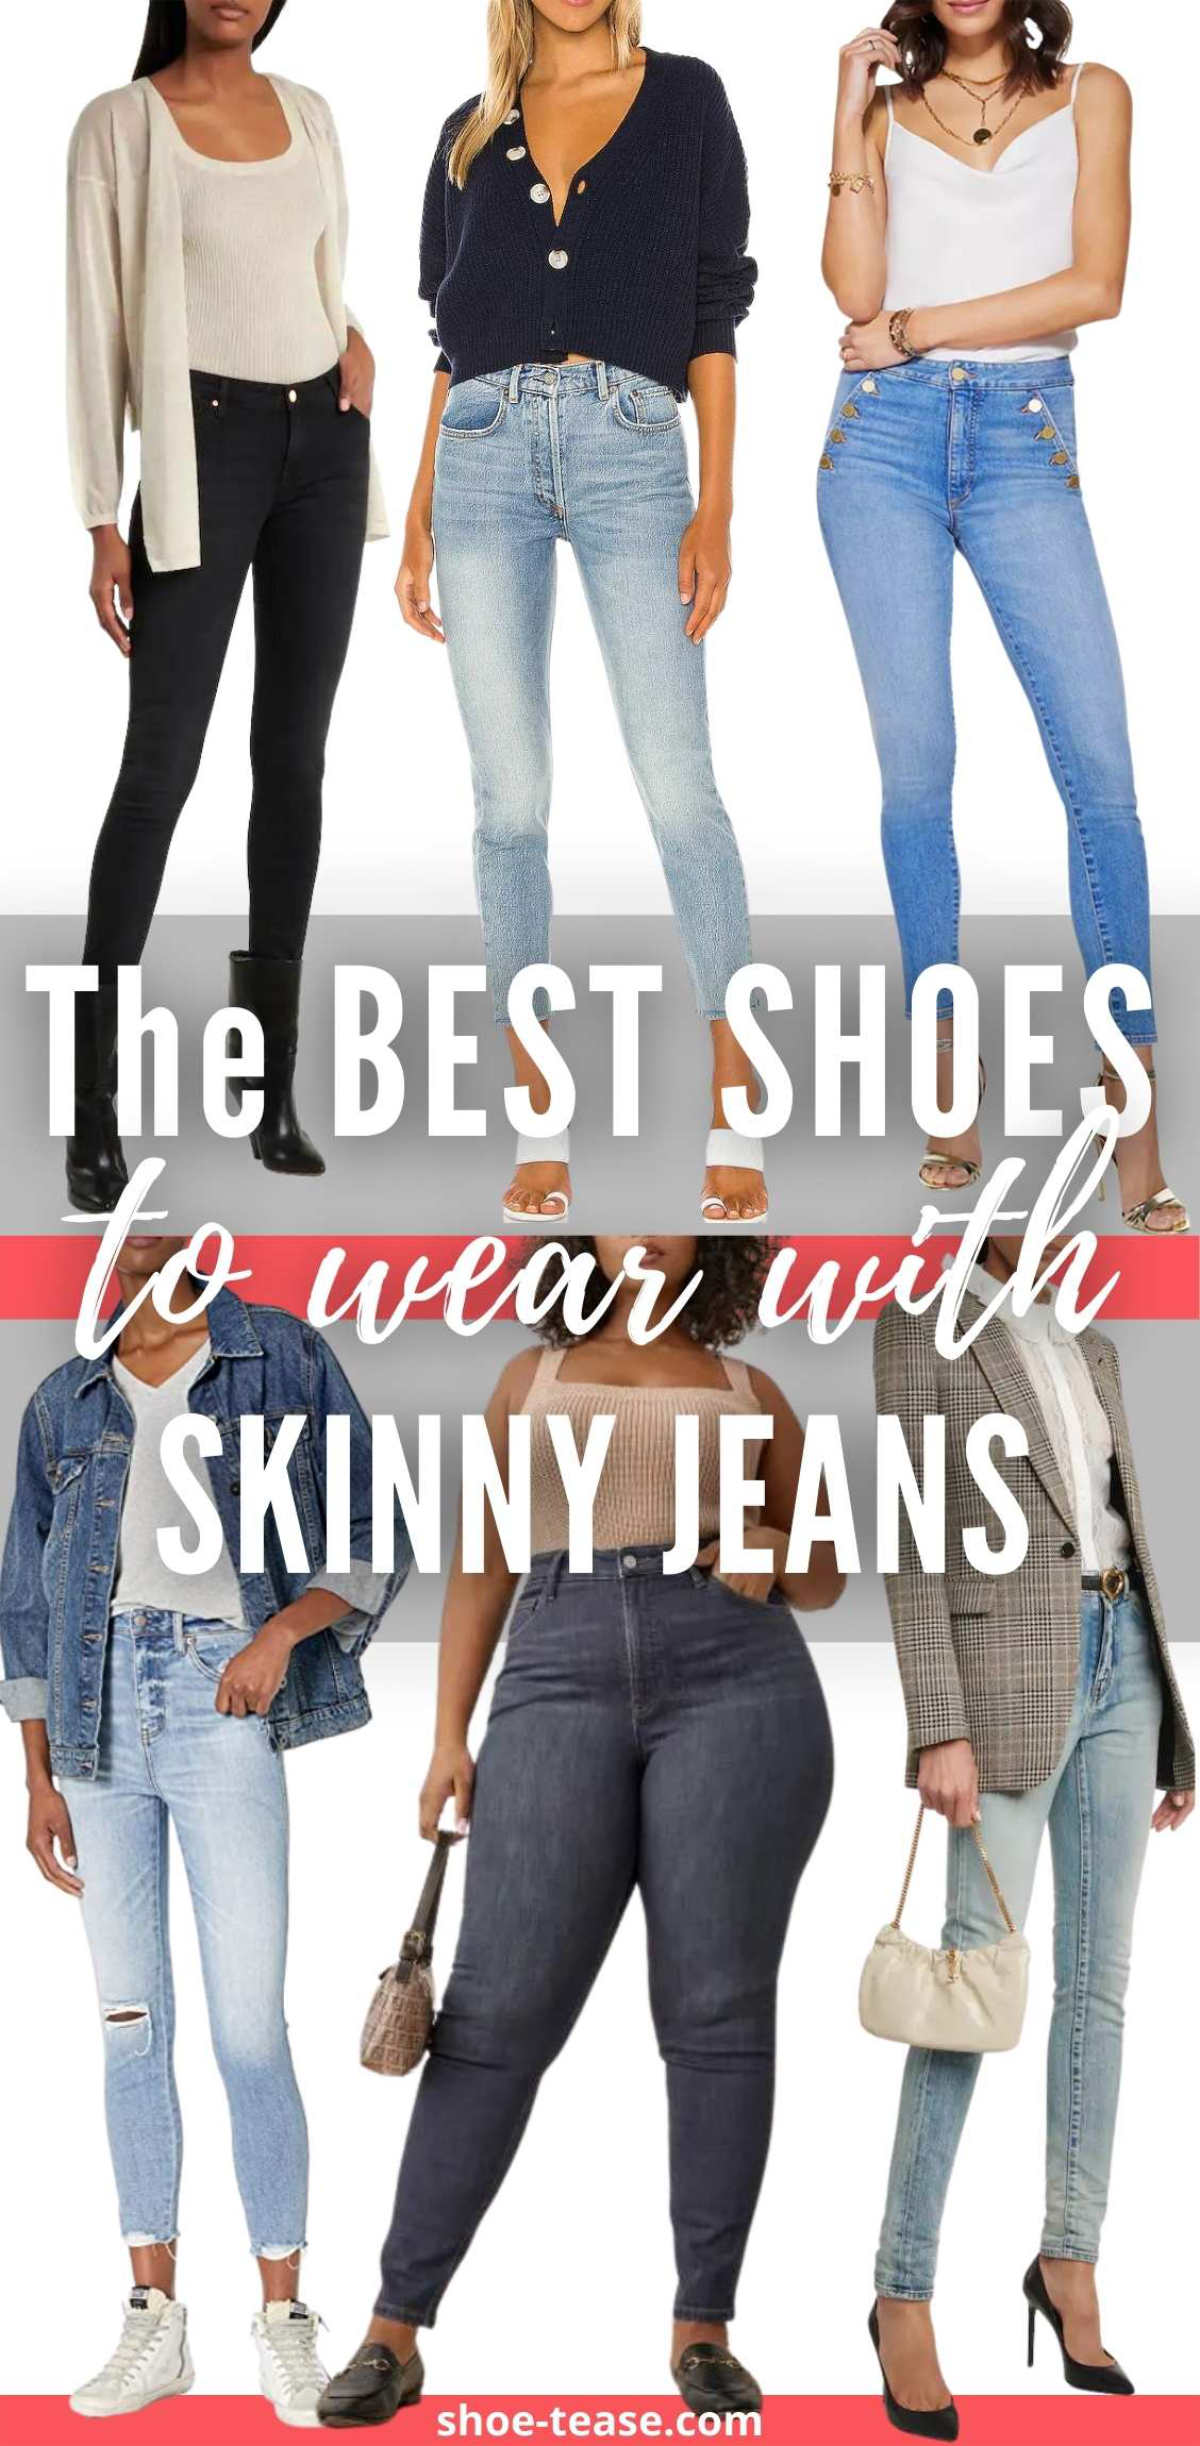 Best Shoes to Wear with Skinny Jeans